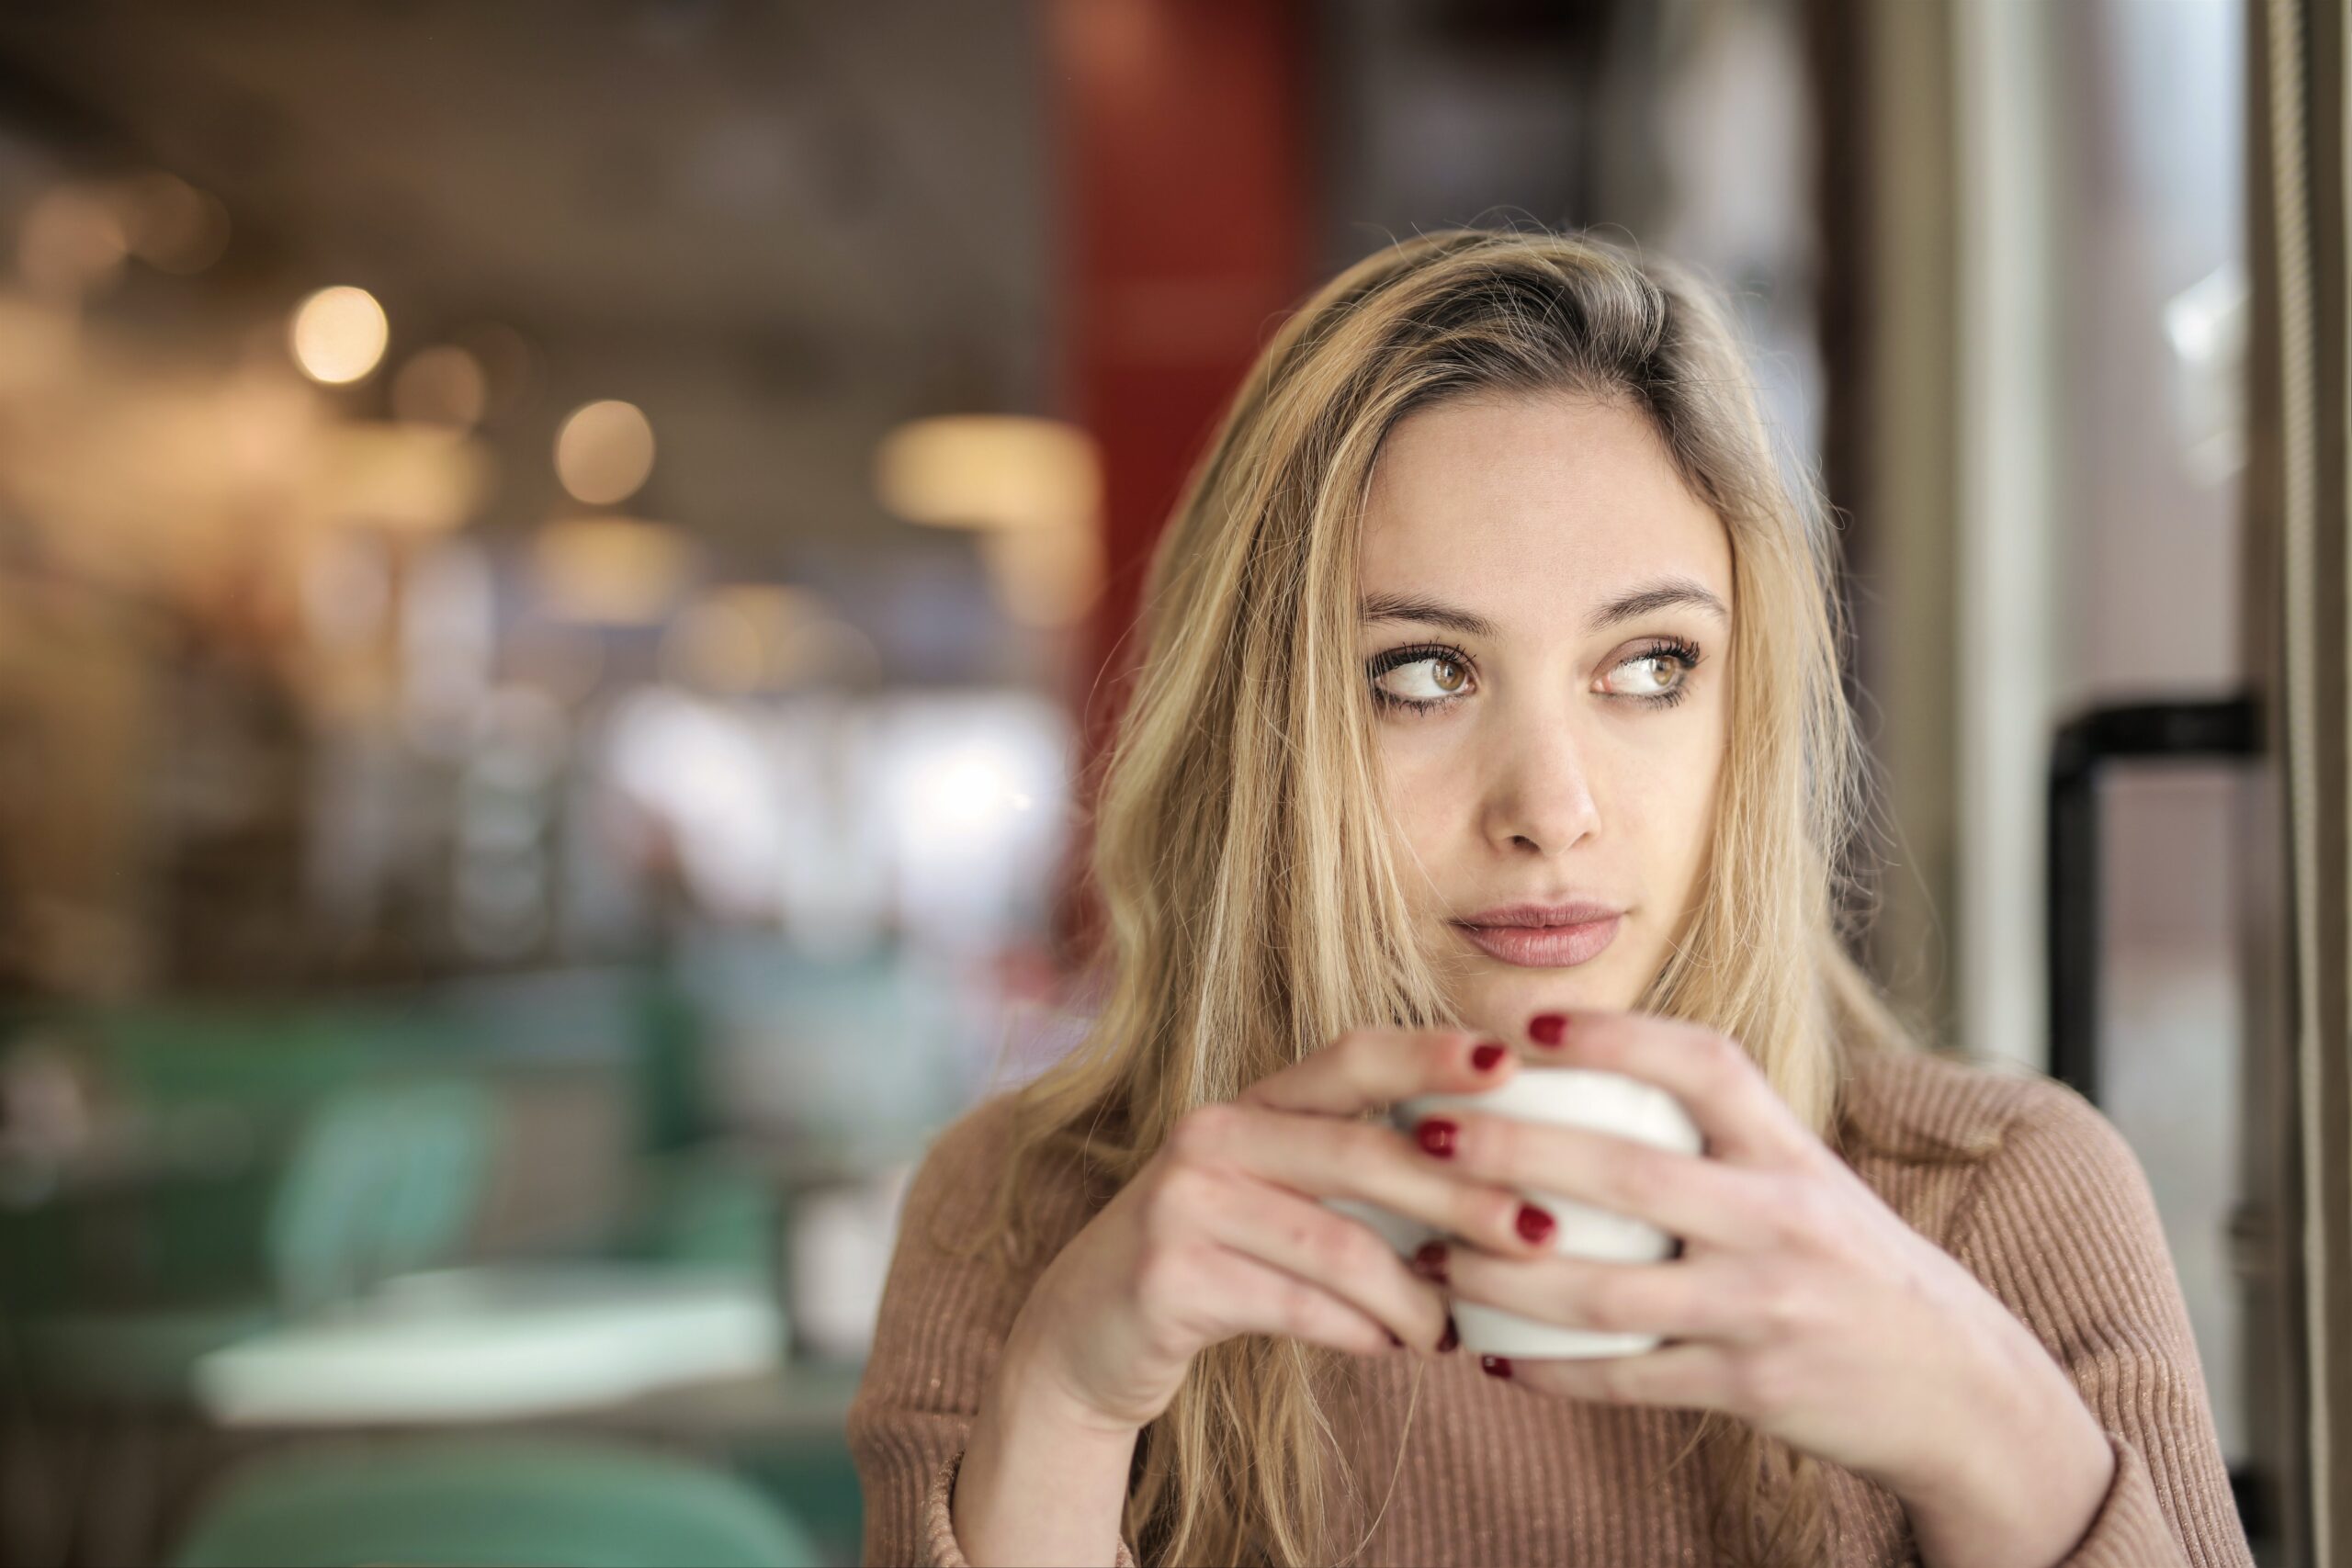 An image of a woman drinking coffee, thinking about all of the reasons to get sober